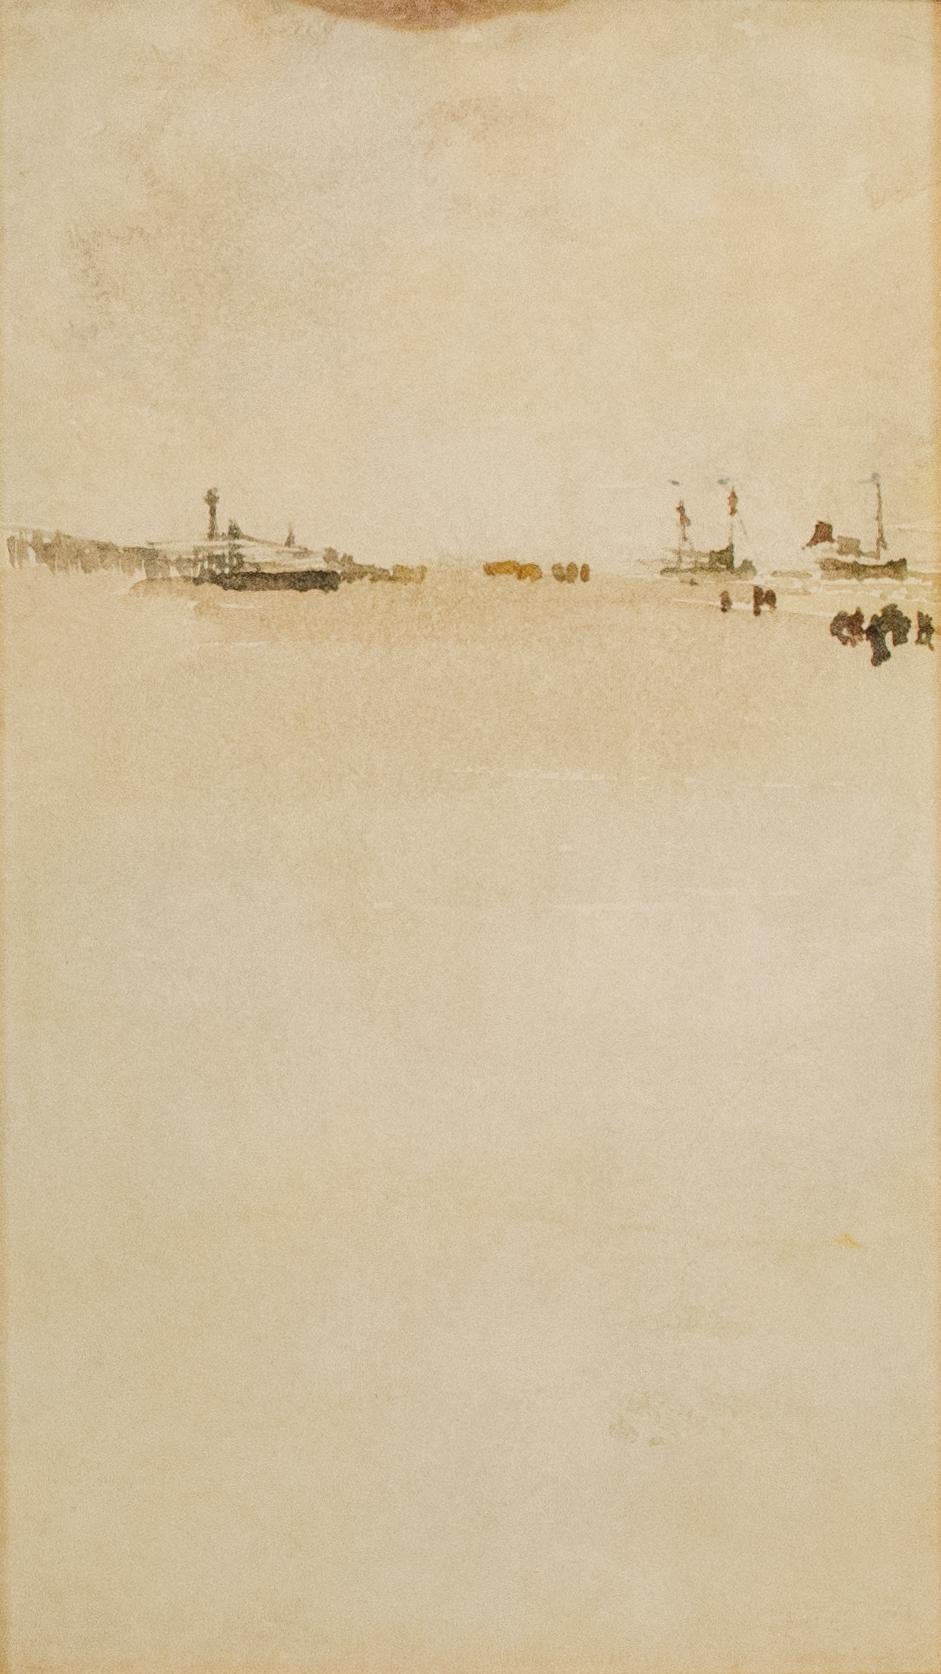 James Abbott McNeill Whistler
Beach Scene at Dieppe, 1885-86
Watercolor on paper, mounted on board
8 1/2 x 5 inches
Signed on the reverse 

Provenance:
Miss Annie Burr Jennings
Mrs. Walter James, New York
Parke-Bernet Galleries, March 21-22, 1947,